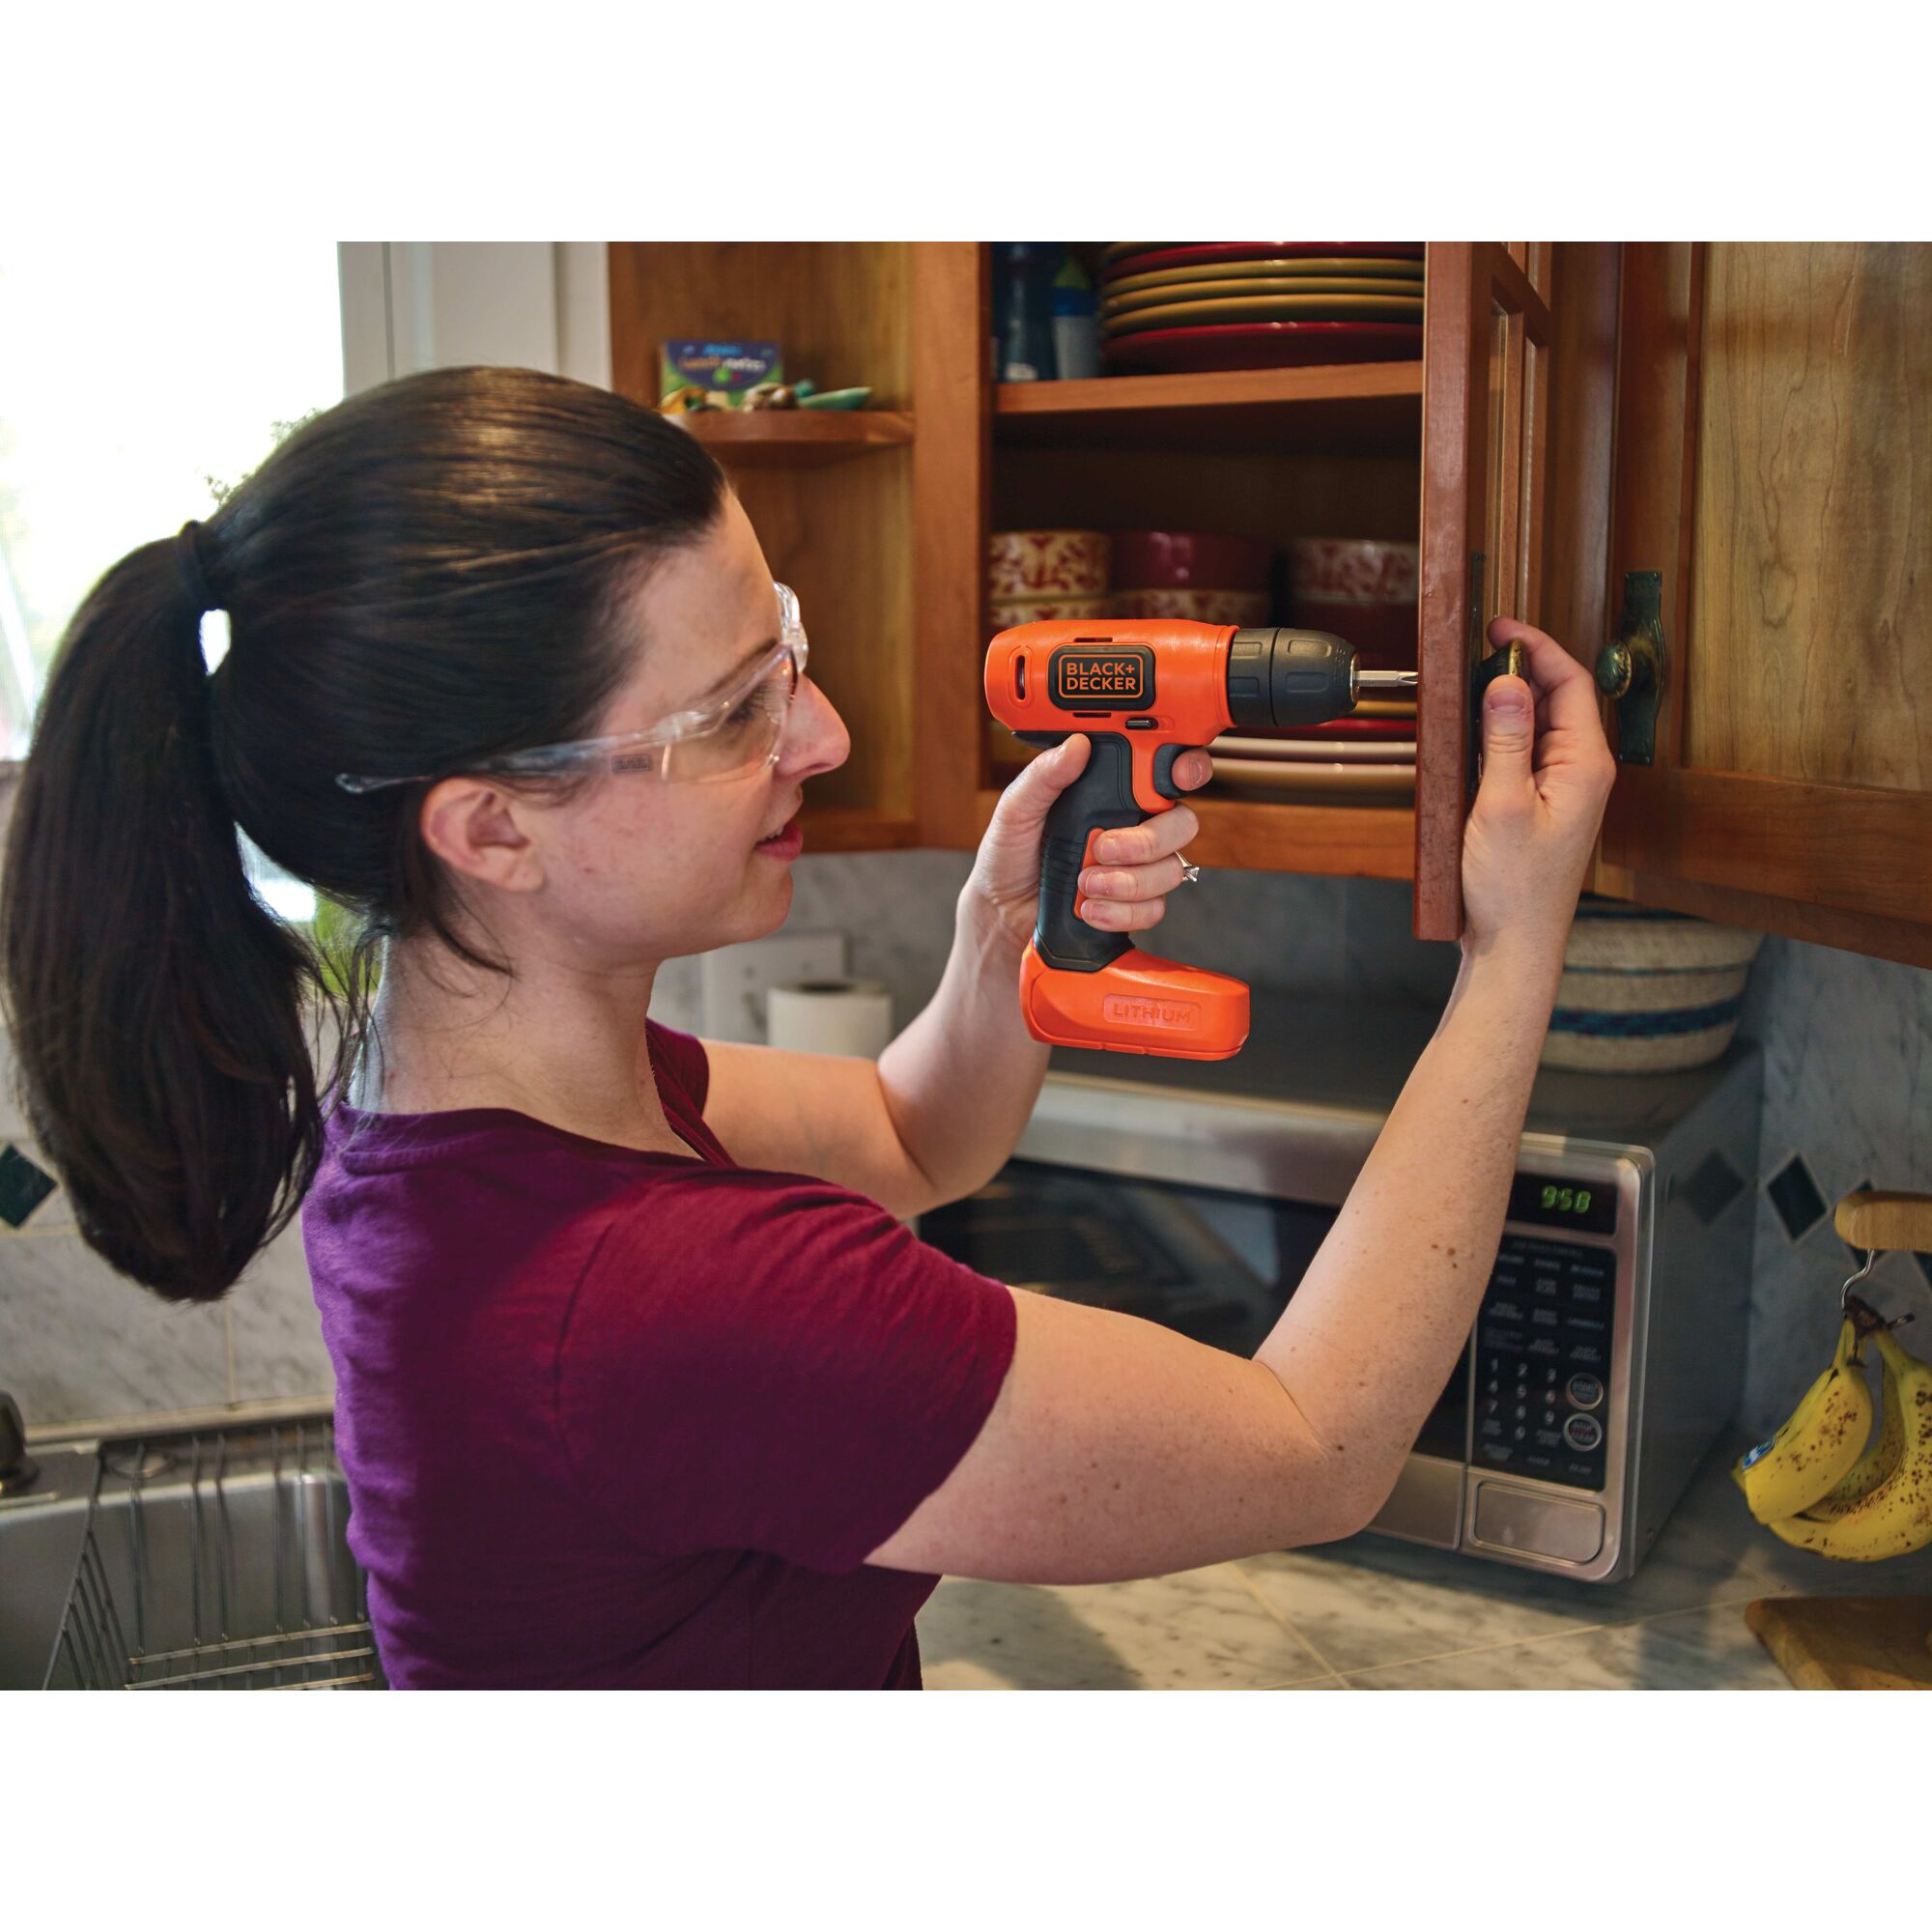 Cordless lithium drill being used attach a knob to the cabinet by a person.